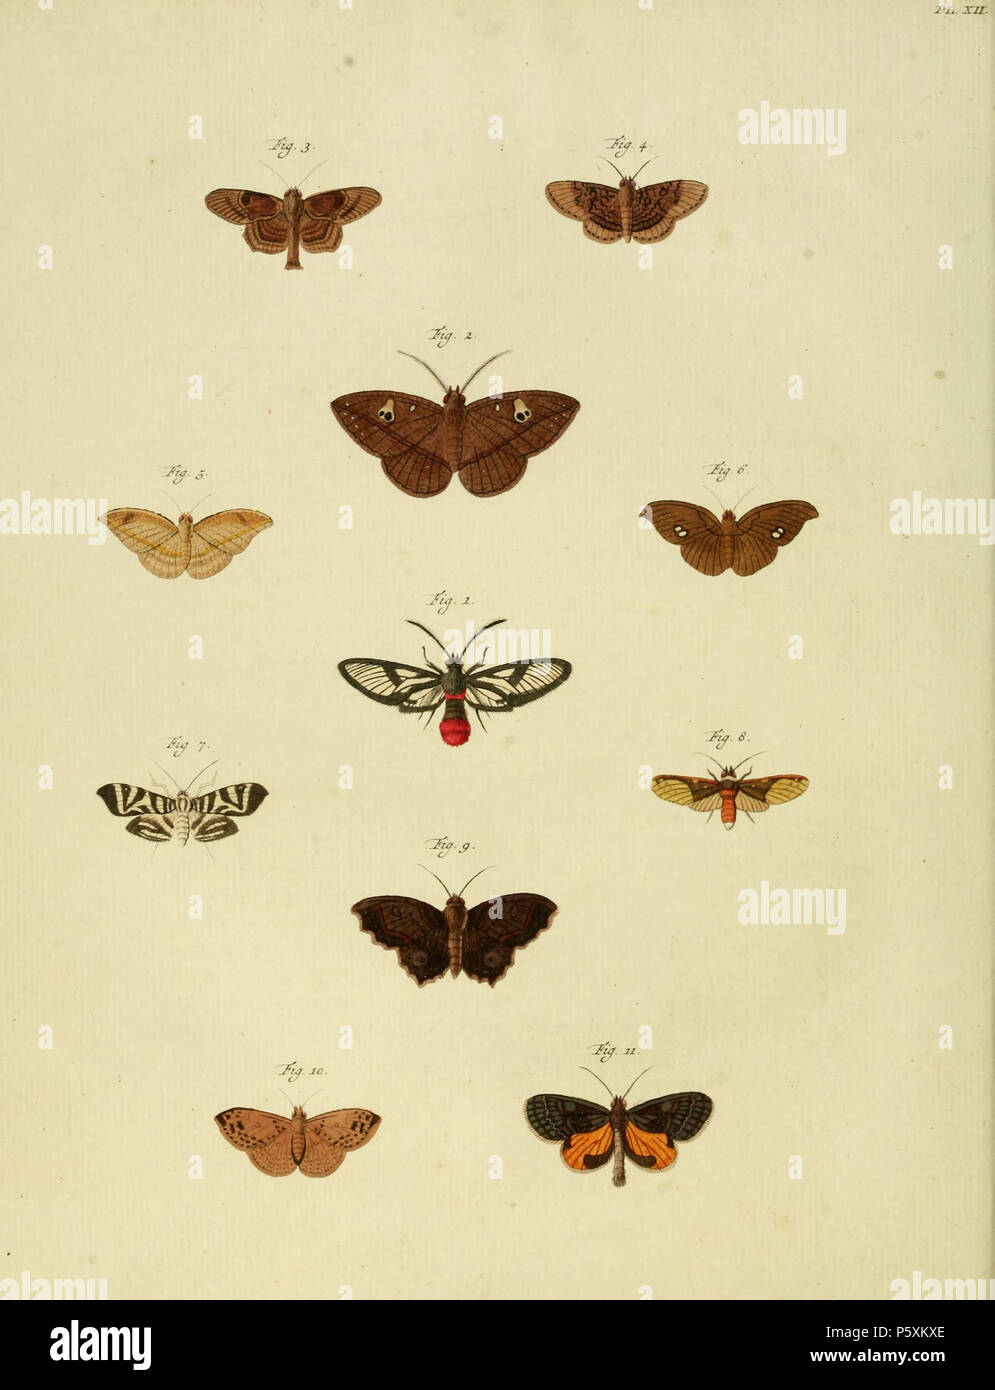 N/A. Plate XII Warning: some taxa/names may be misidentified/misapplied or placed in a different genus.  1: Sphinx Adscit[a] HÆMORRHOIDALIS ( = Aethria haemorrhoidalis (Stoll, [1790]), iconotype, see Funet). Photos on Treknature and Hétérocères de Guyane Française.  In register spelled HEMORRHOIDALIS  2: Phal[aena] Geomet[ra] EULALIA ( = Gorgone ortilia (Stoll 1781), see NHM, Global Lepidoptera Names Index).  Also on plate 165 F as [Phalaena] Ortilia.  3: Phal[aena] Noct[ua] Archadia ( = Dolichosomastis archadia (Stoll, 1790), see NHM, Global Lepidoptera Names Index.  Errors in register, see p Stock Photo